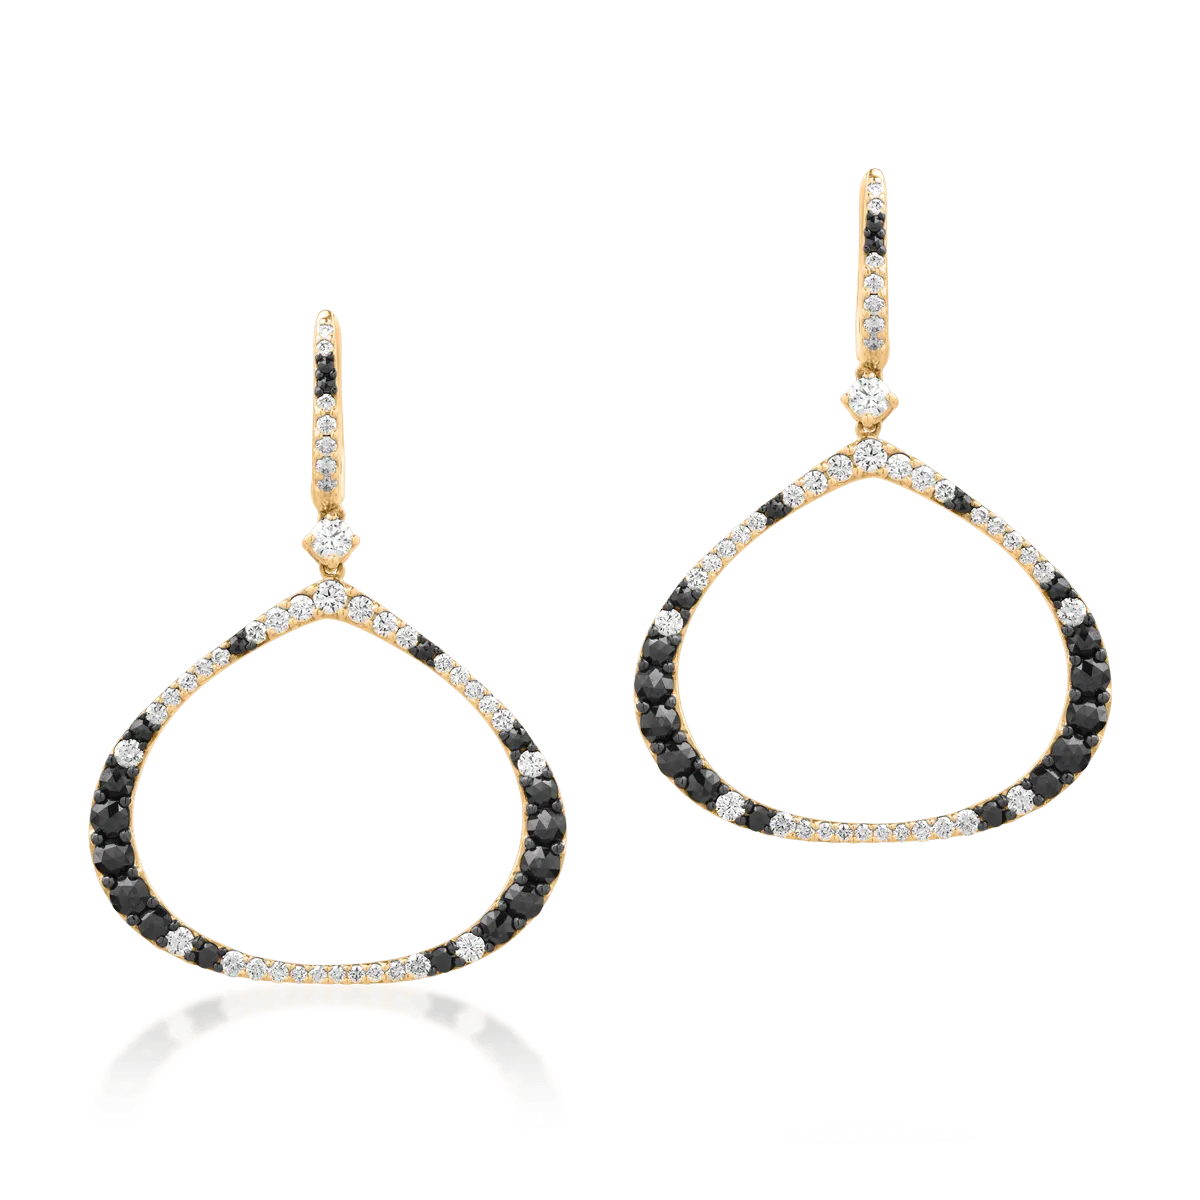 18K yellow gold earrings with 1.13ct brown diamonds and 1.42ct white diamonds